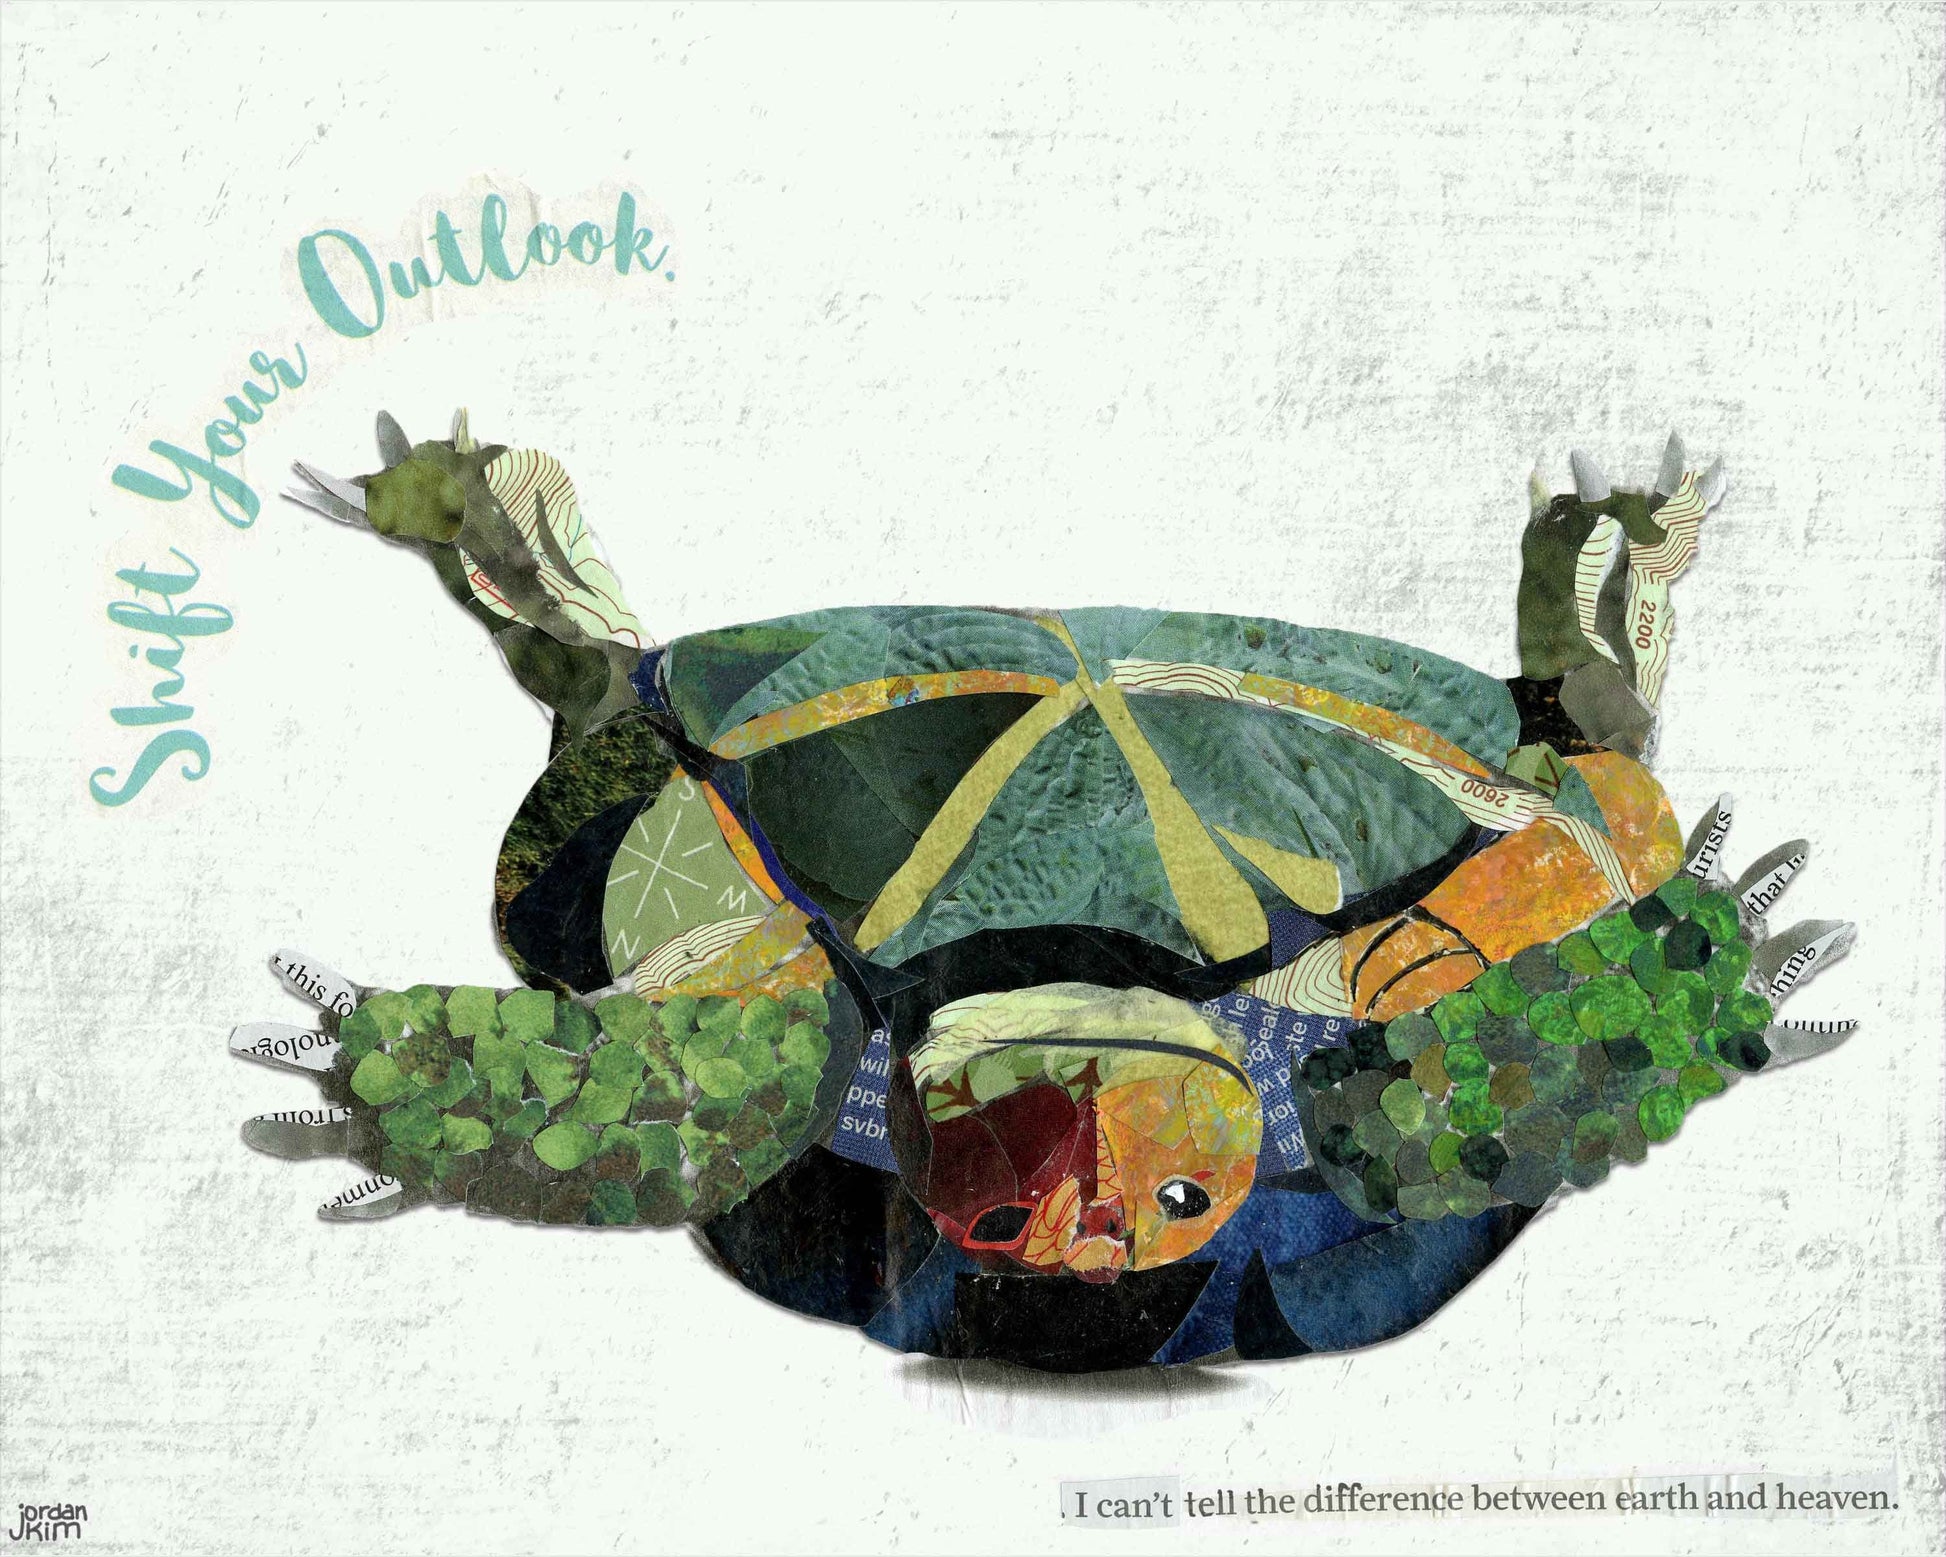 8x10 Art Print of a Turtle on its Back - Shift Your Outlook - Inspiration - Support - Animals - Office Art - Kid's Room - Fun